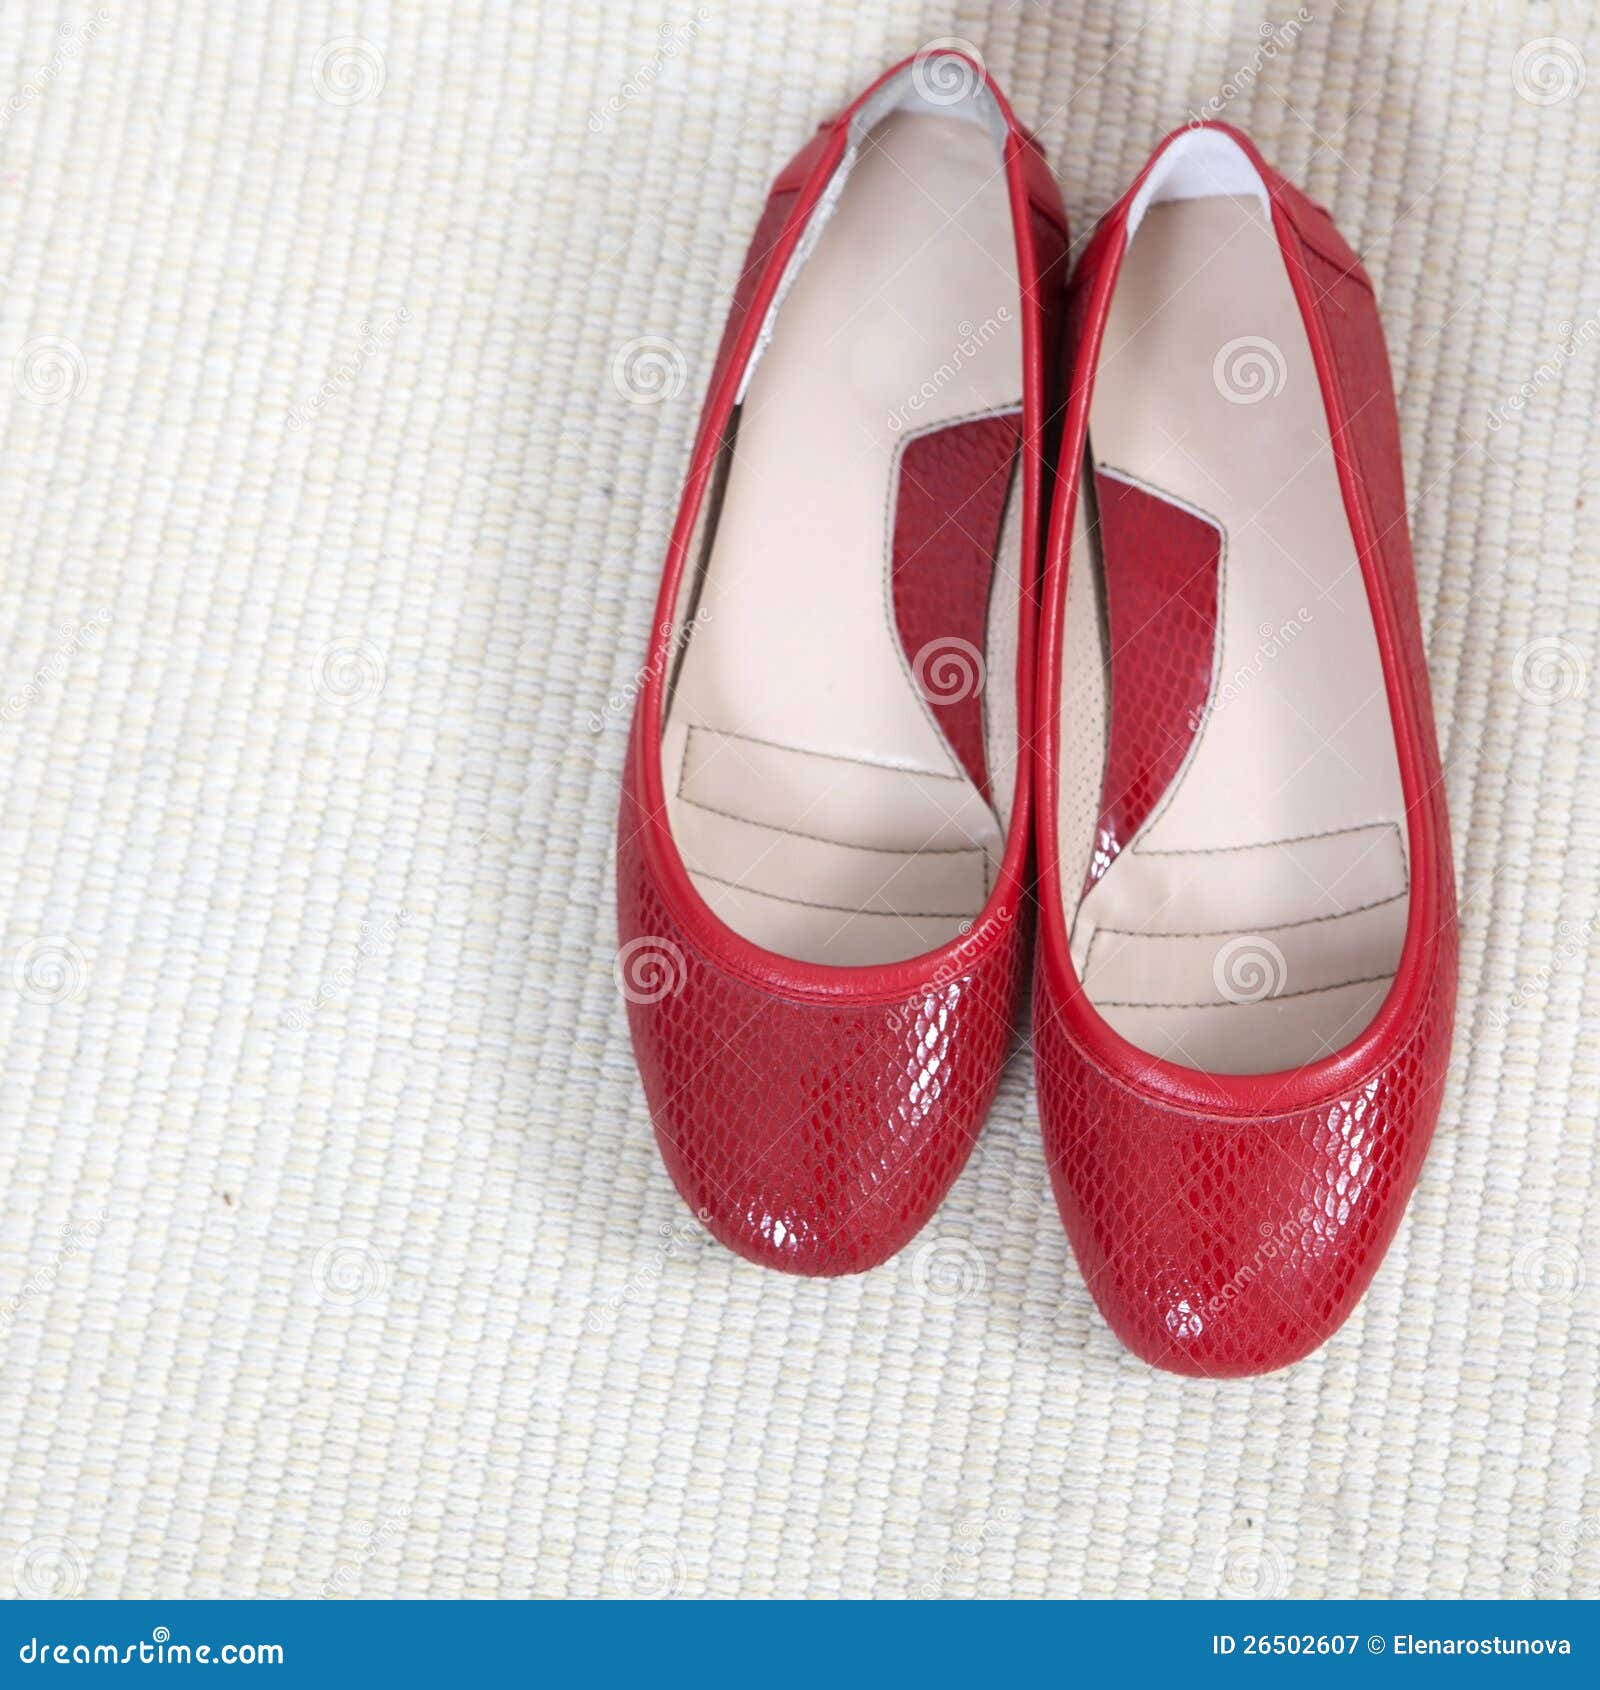 Red shoes stock image. Image of dressy, ladies, wear - 26502607